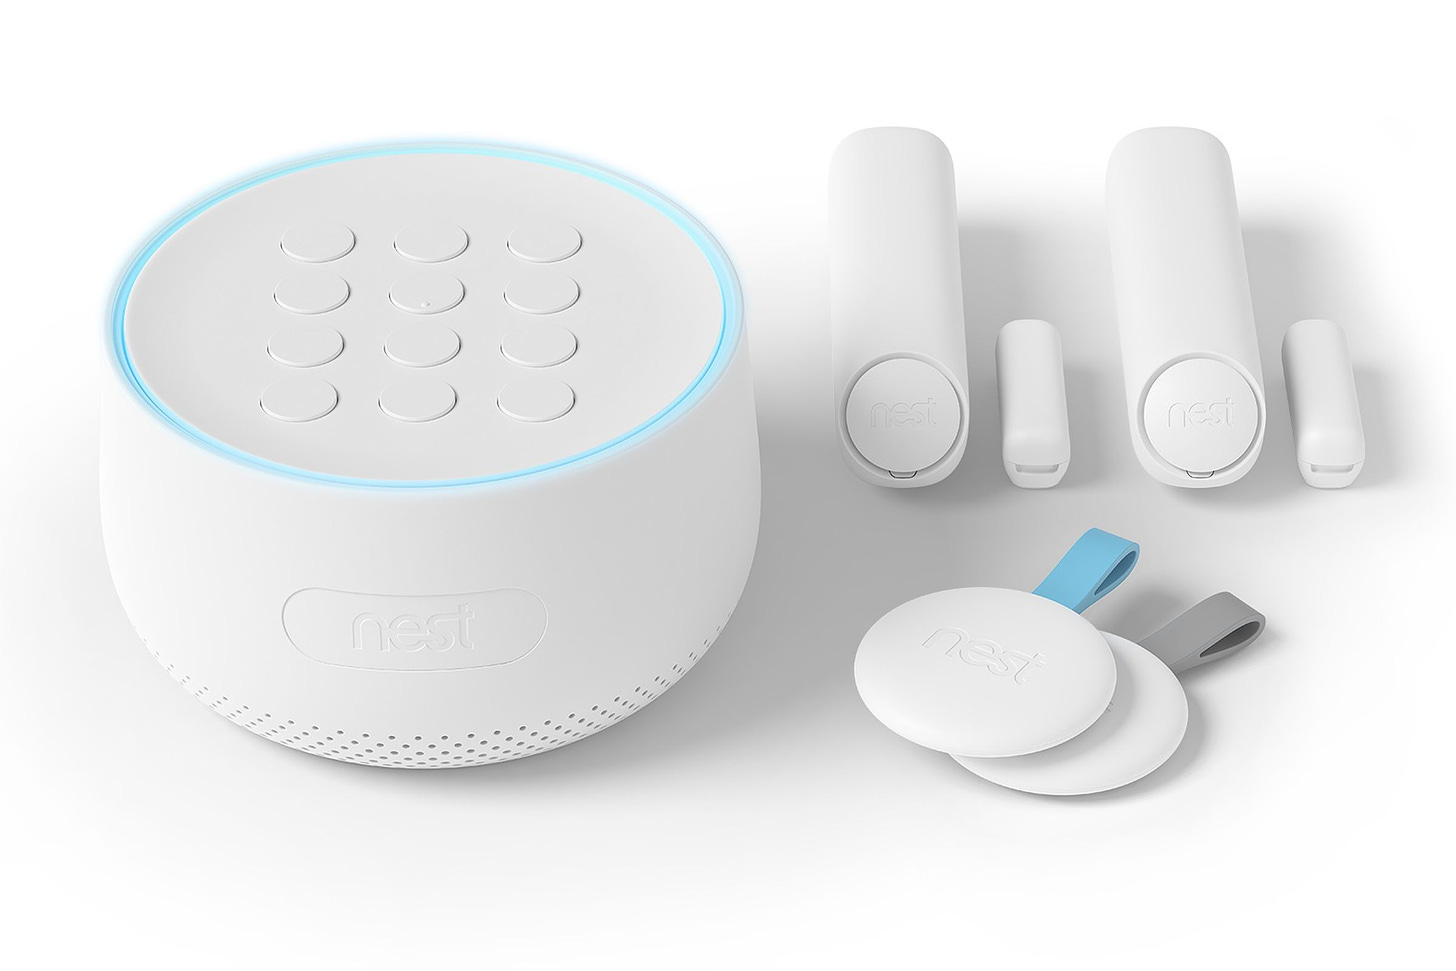 Google’s smart home security system Nest Secure will stop working today, April 8th.